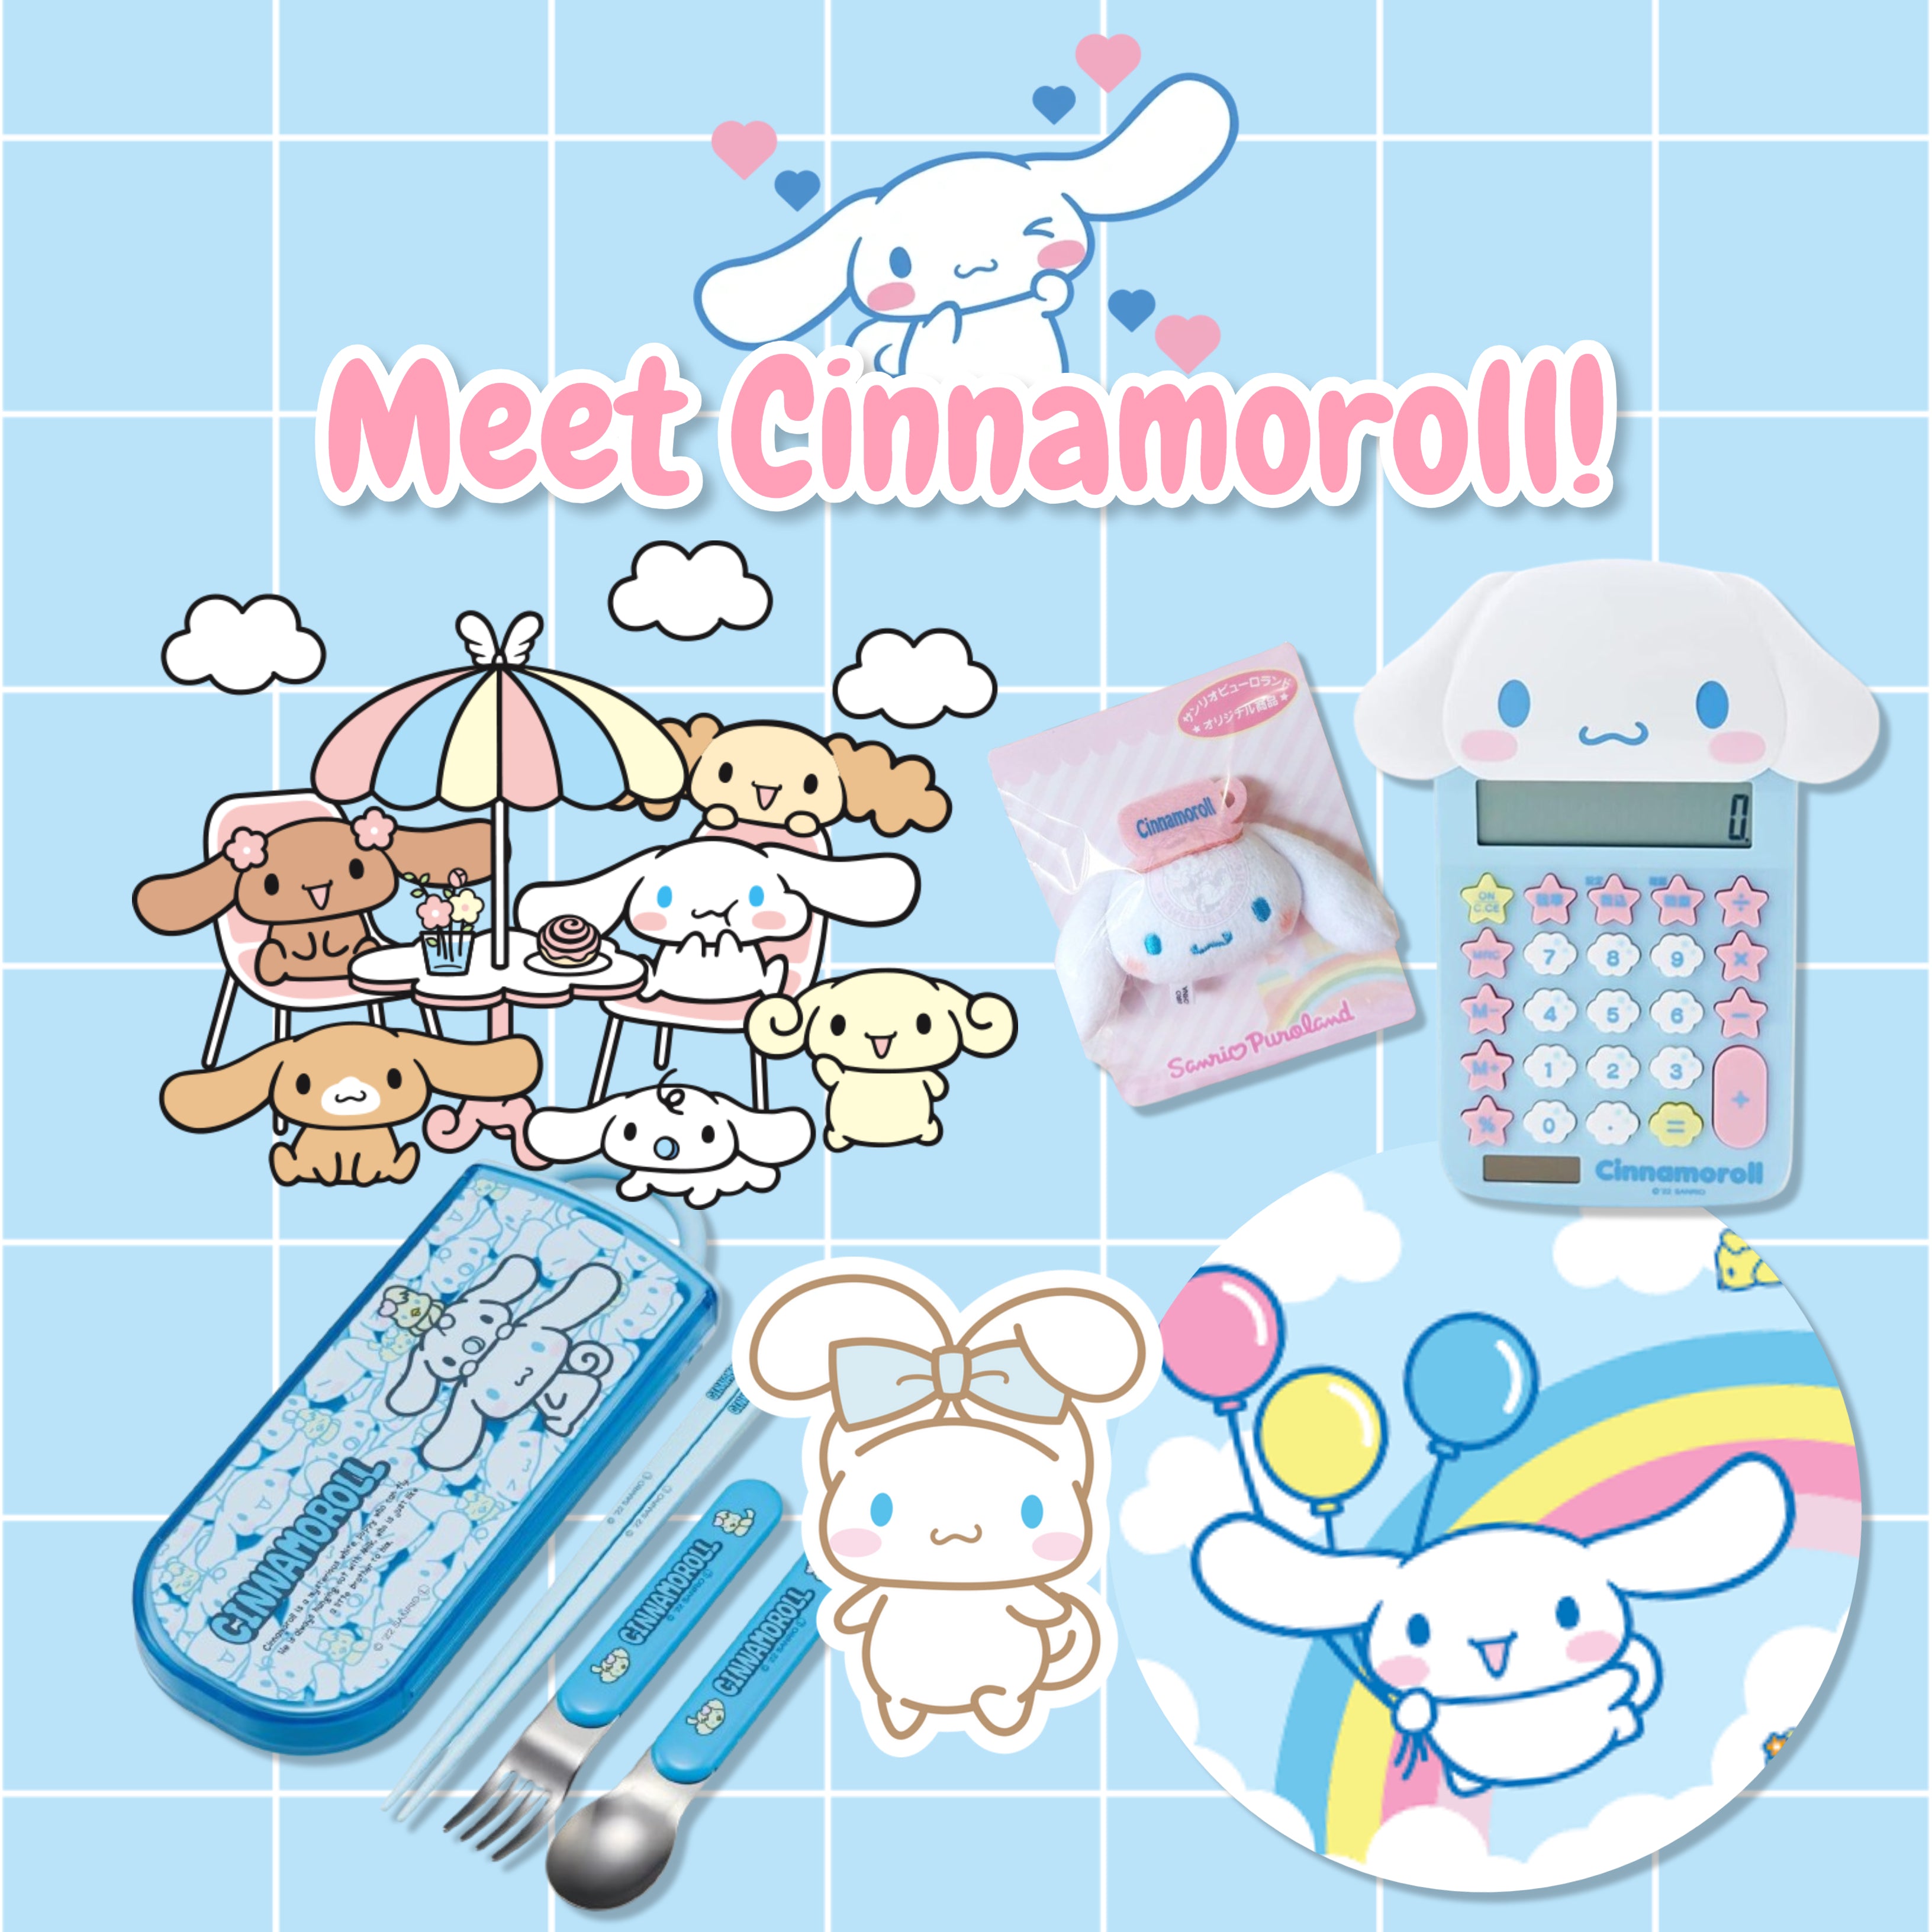 Blog post about Cinnamoroll and our top Cinnamoroll themed items